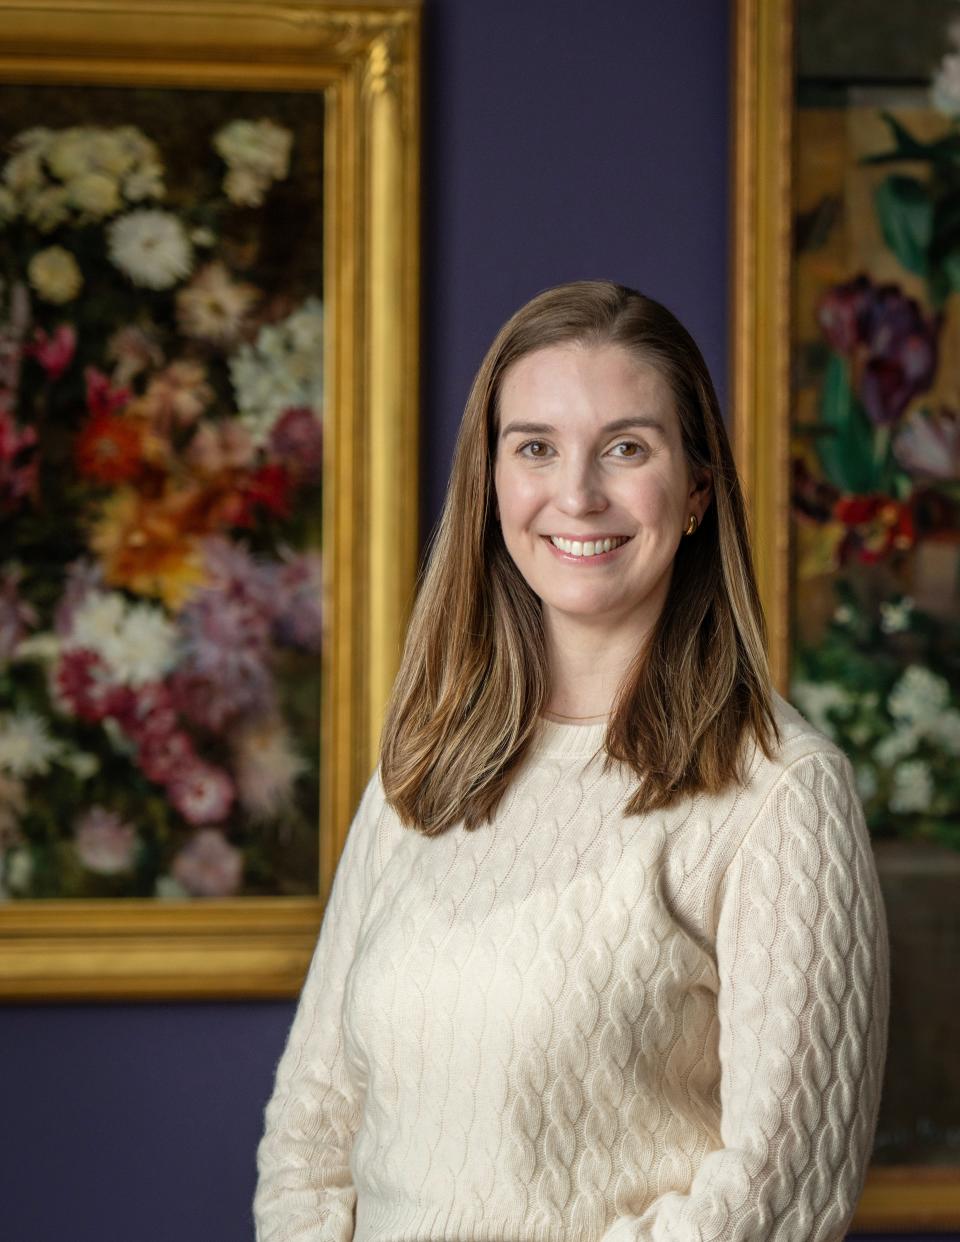 Emily Mazzola, the new curator at Fitchburg Art Museum, has a Ph.D. from the department of art and architecture at the University of Pittsburgh. She hopes to fashion a career by seamlessly weaving her expertise in textiles and historical dress into the museum's exhibitions.